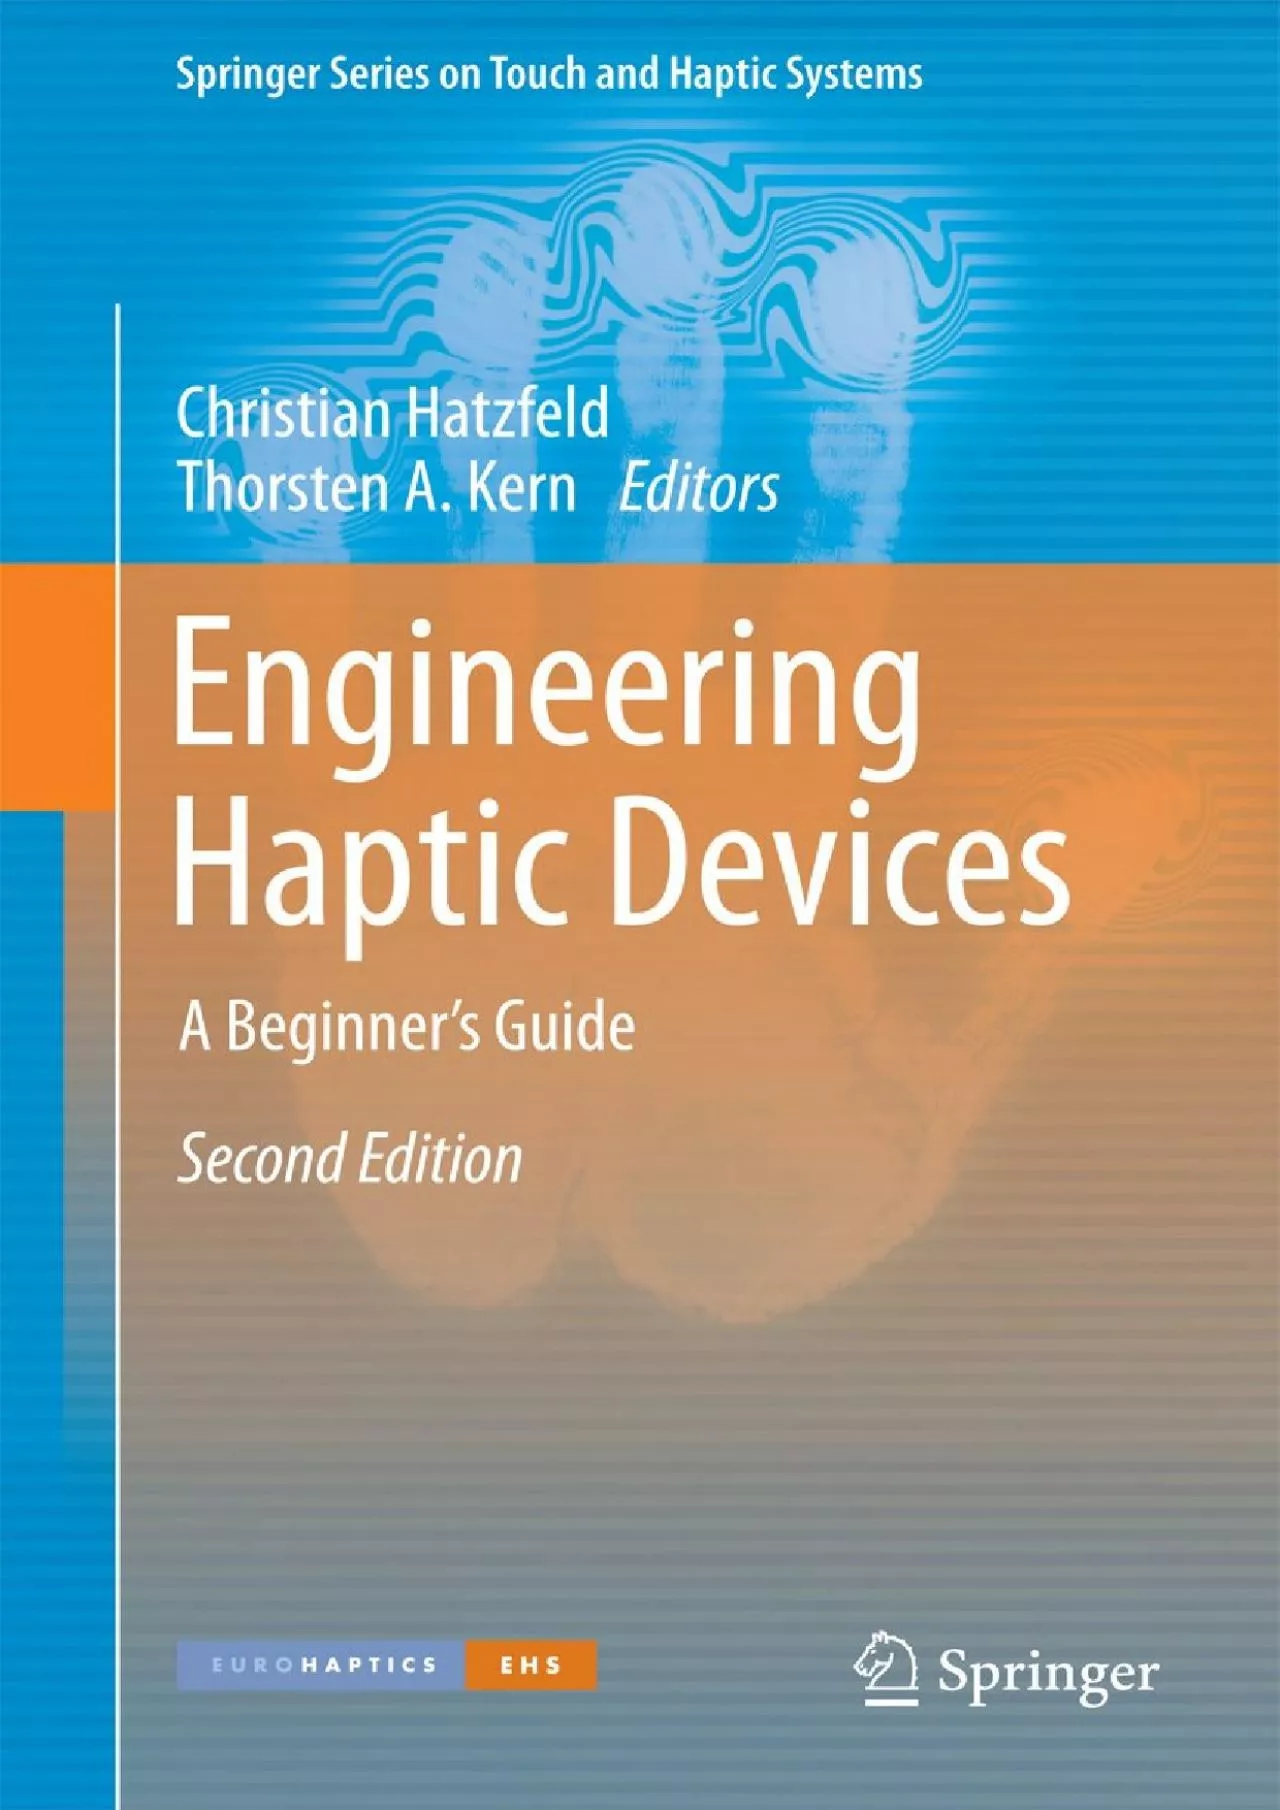 (EBOOK)-Engineering Haptic Devices A Beginner\'s Guide (Springer Series on Touch and Haptic